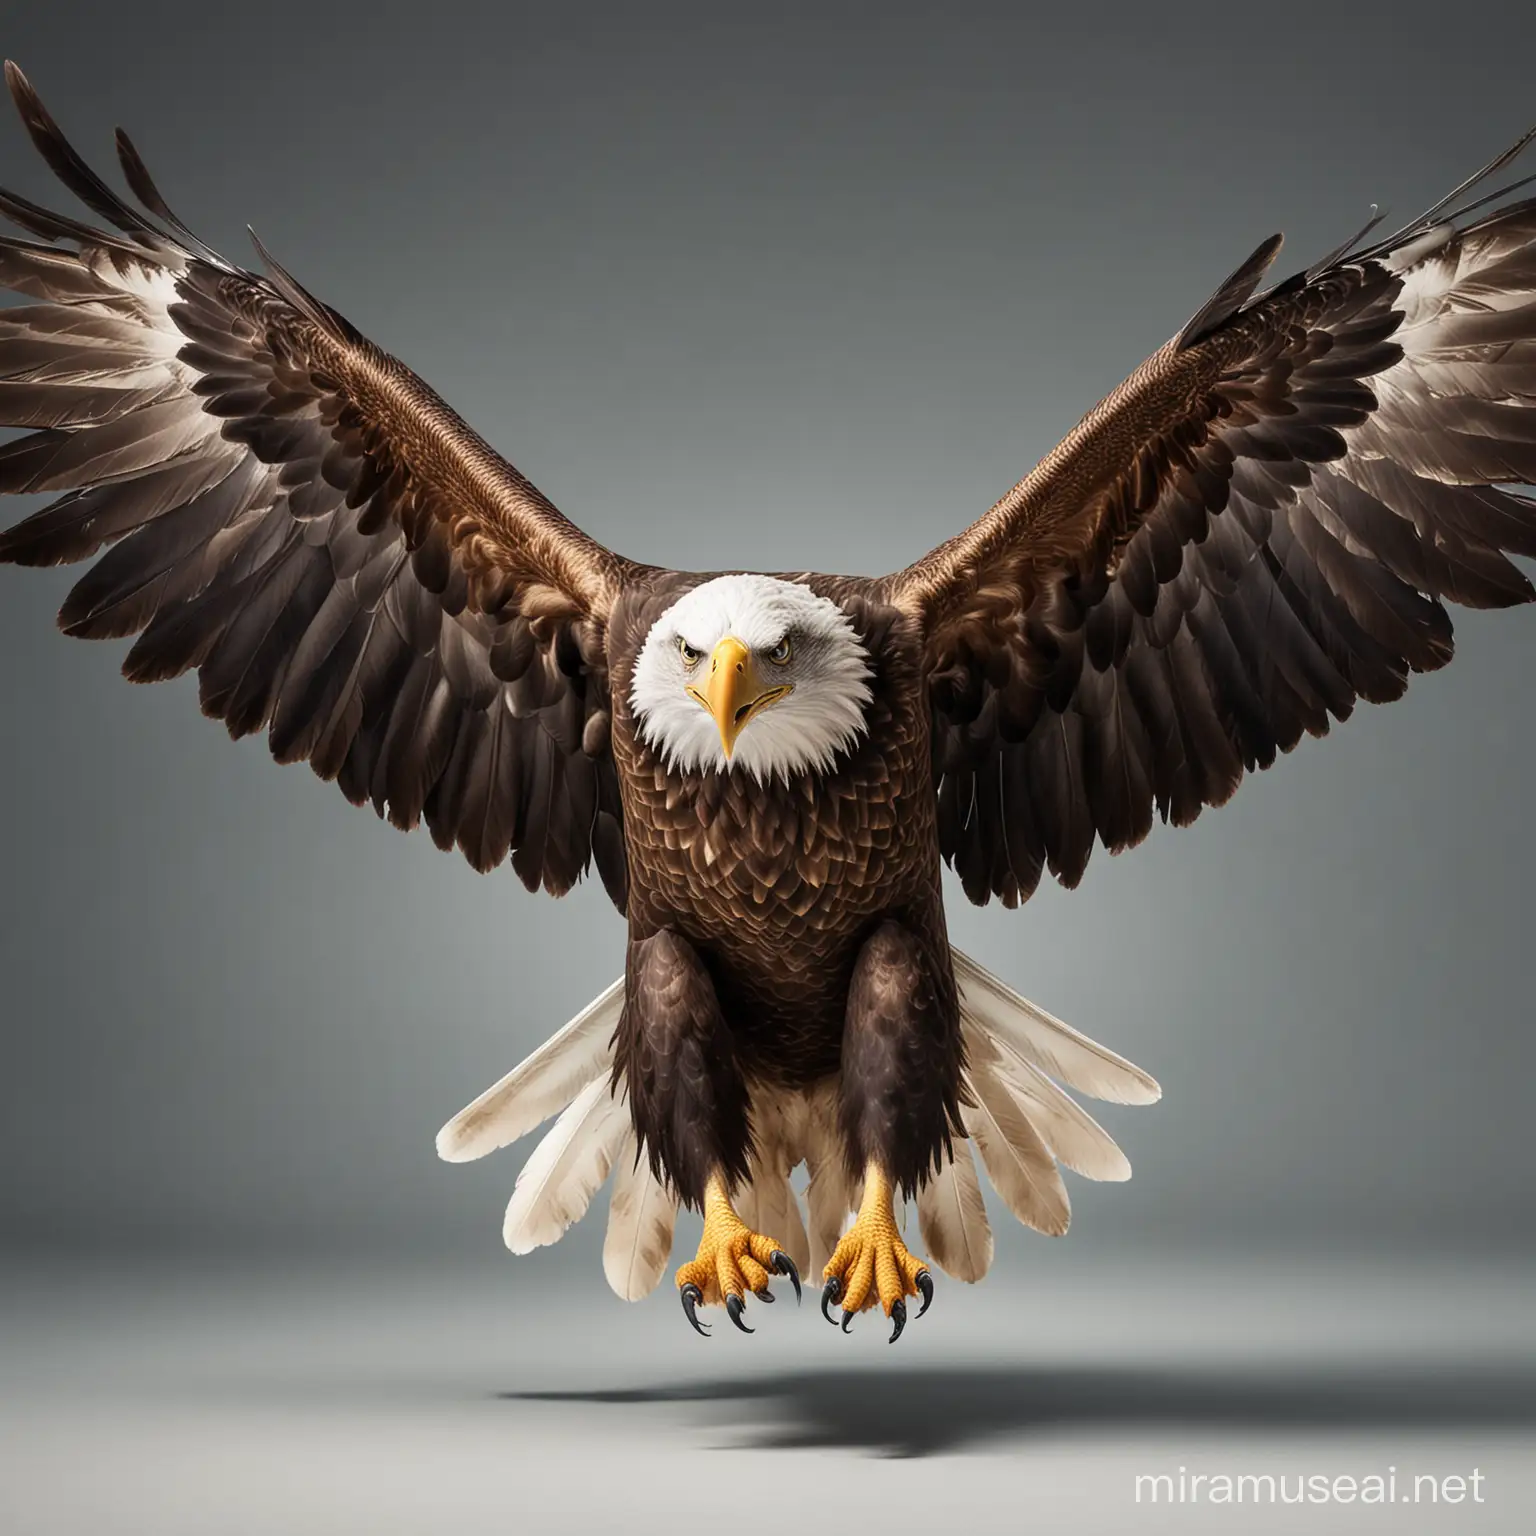 create an image of an eagle facing forward with wings open

